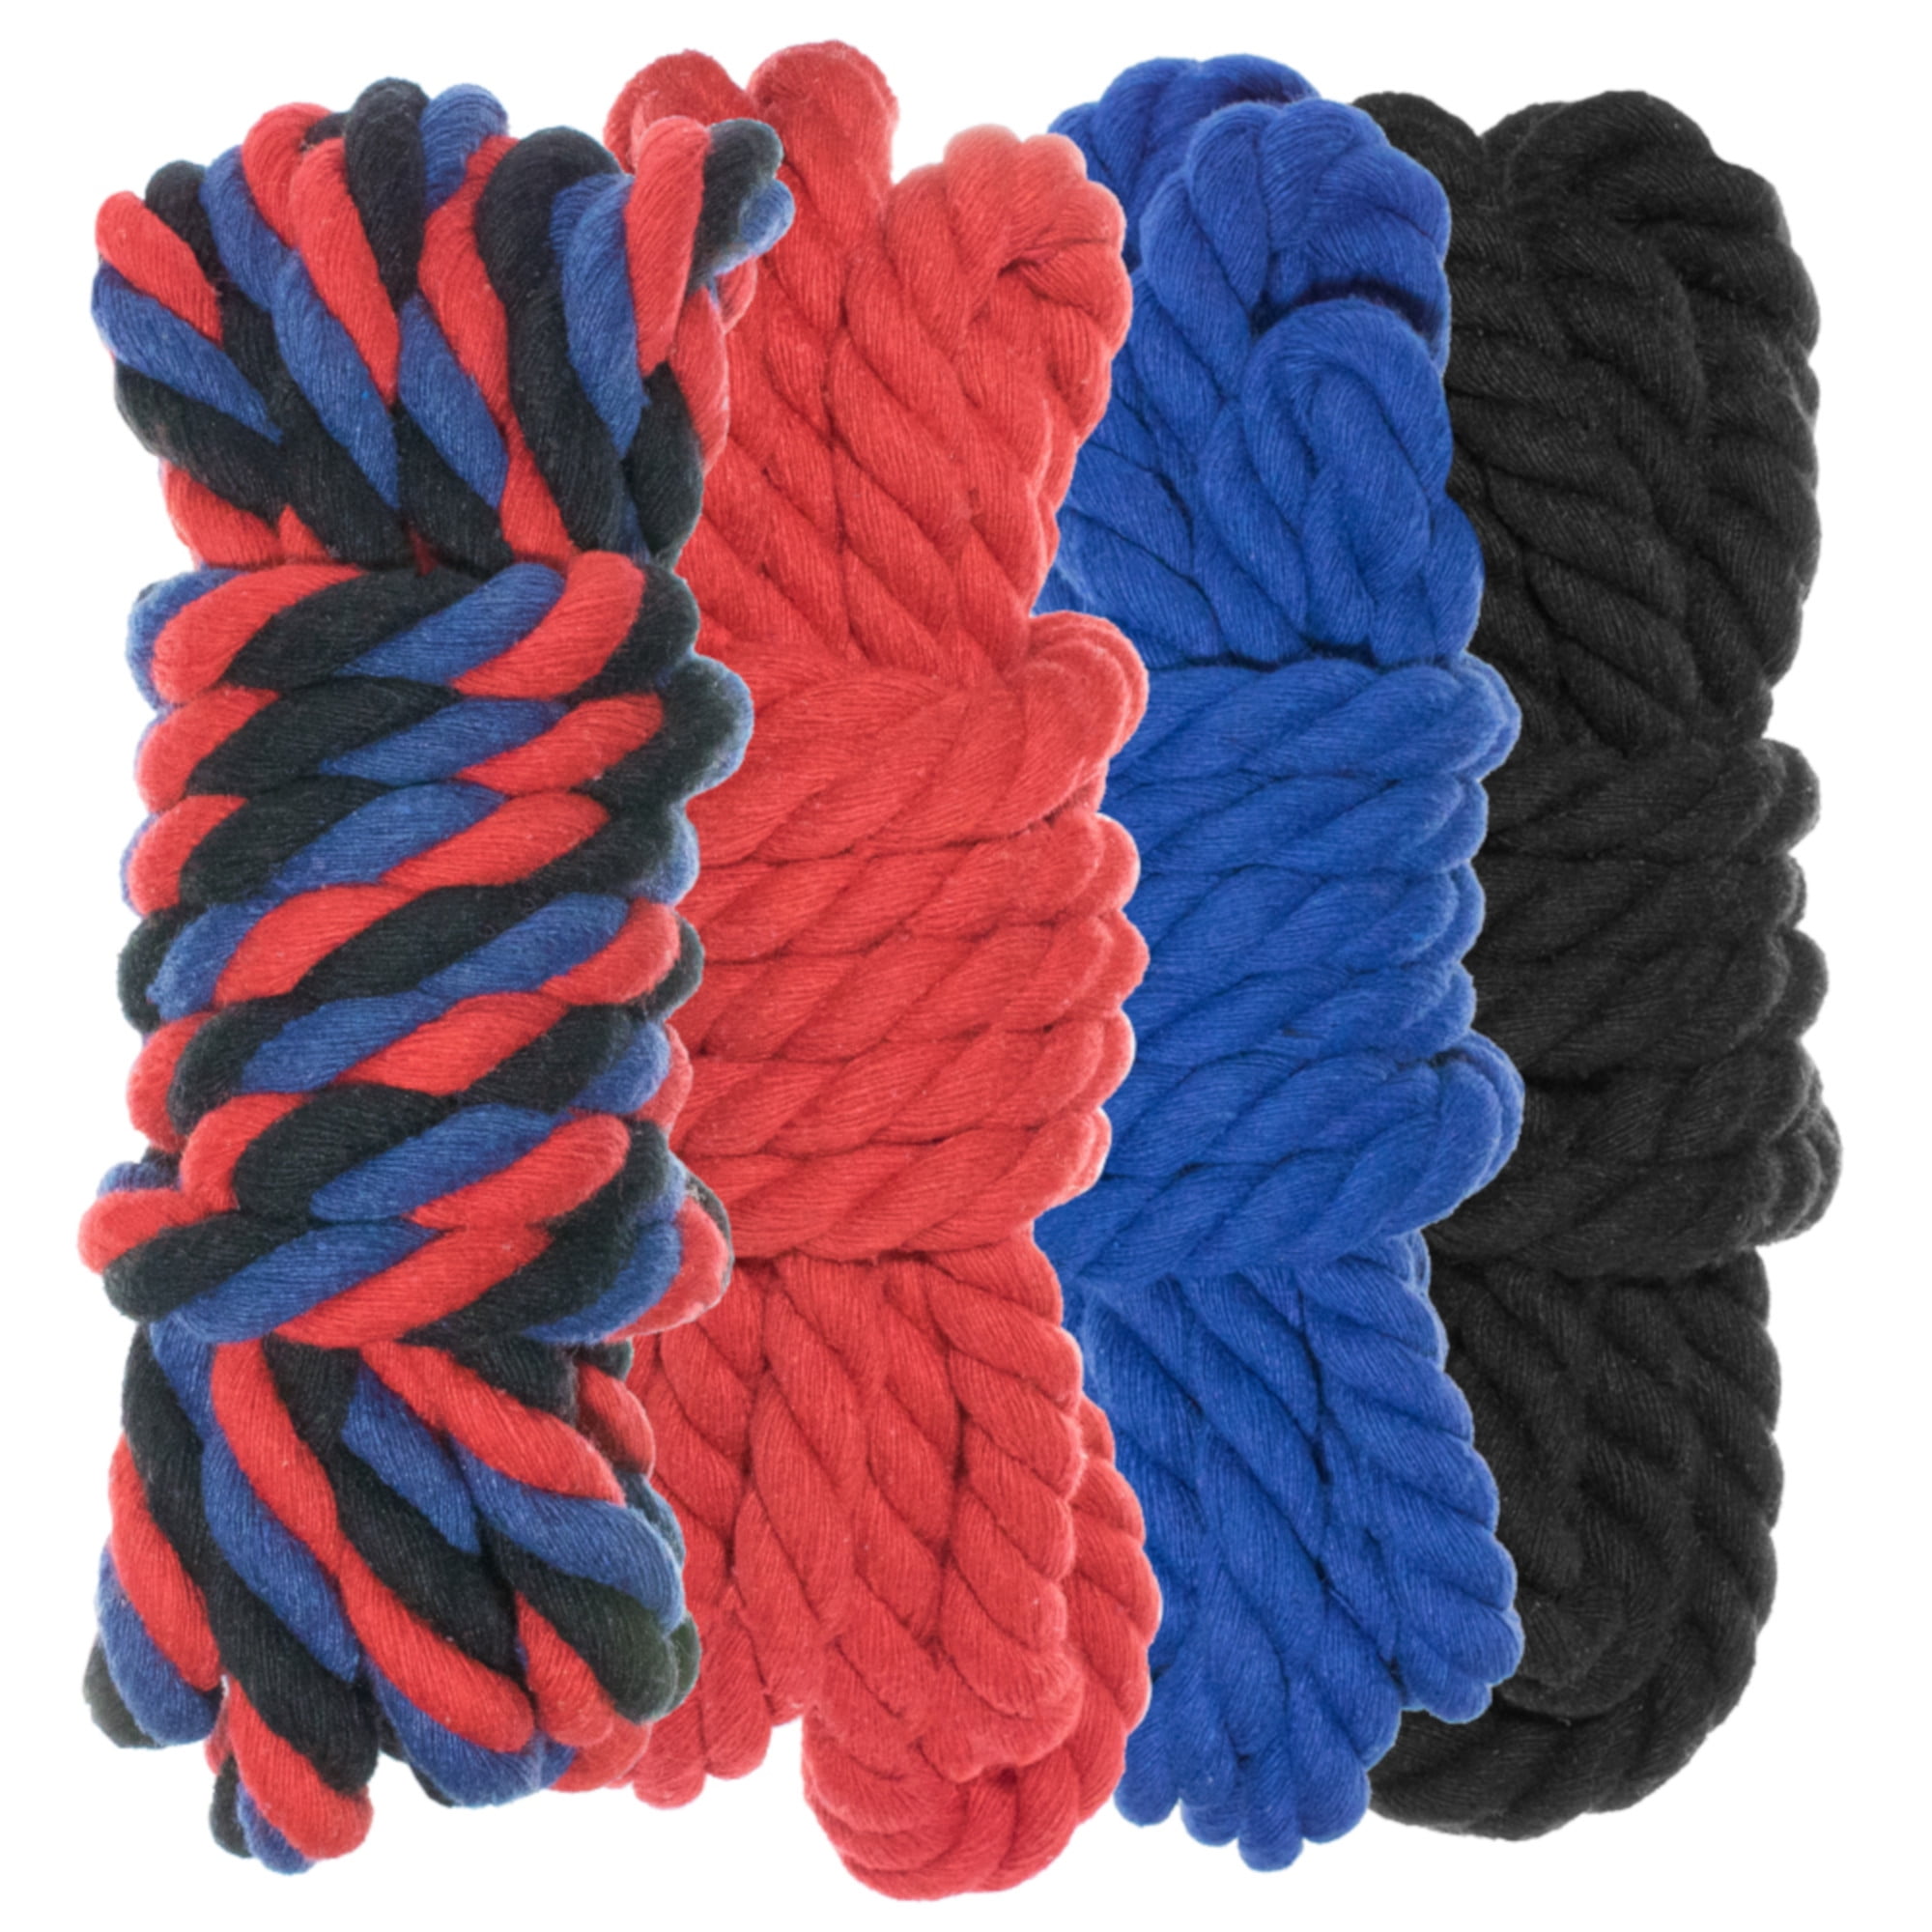 Twisted 3 Strand Natural Cotton Rope 40 and 100 Foot Kits in 1/4 Inch and  1/2 Inch - Soft Knot Tying Artisan Cord Decorative Crafting - Assorted  Colors 